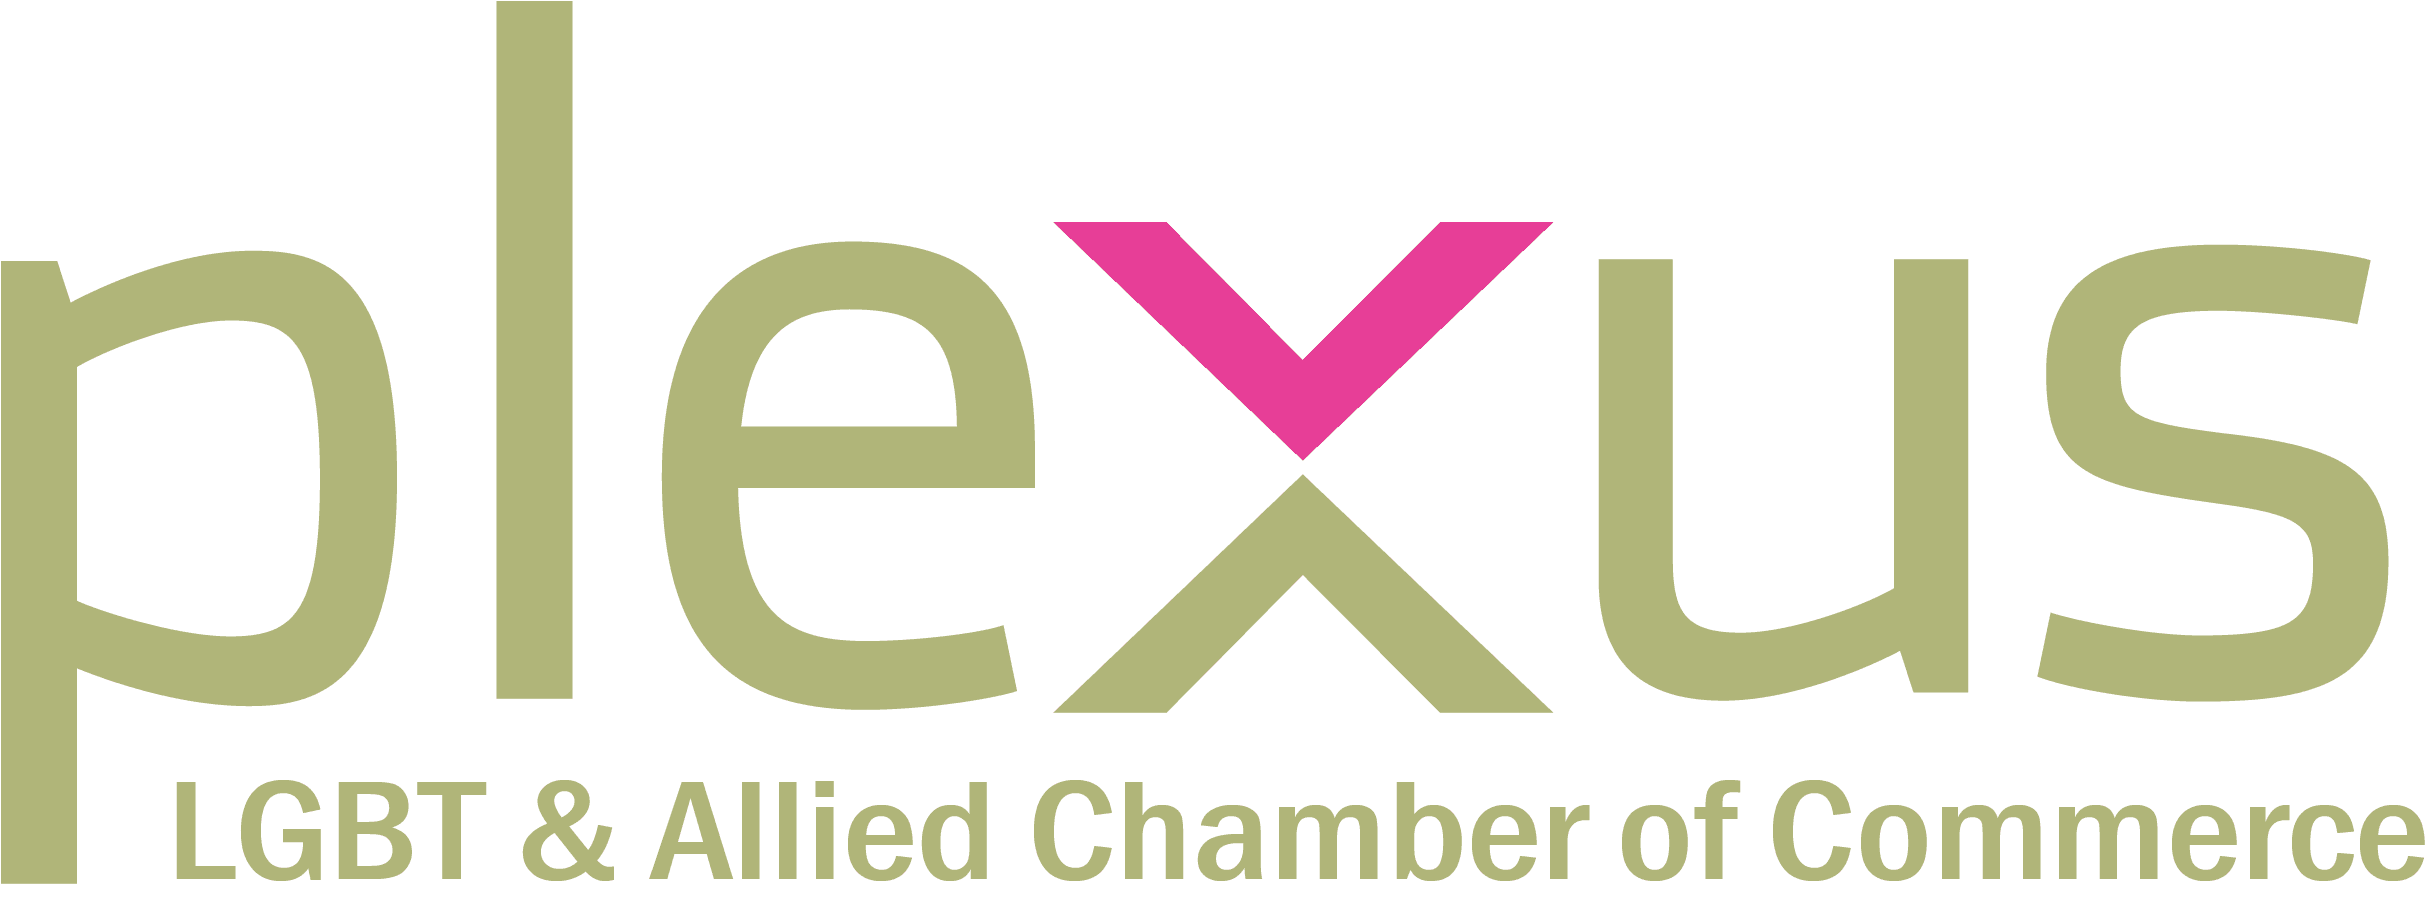 Plexus LGBT and Allied Chamber of Commerce